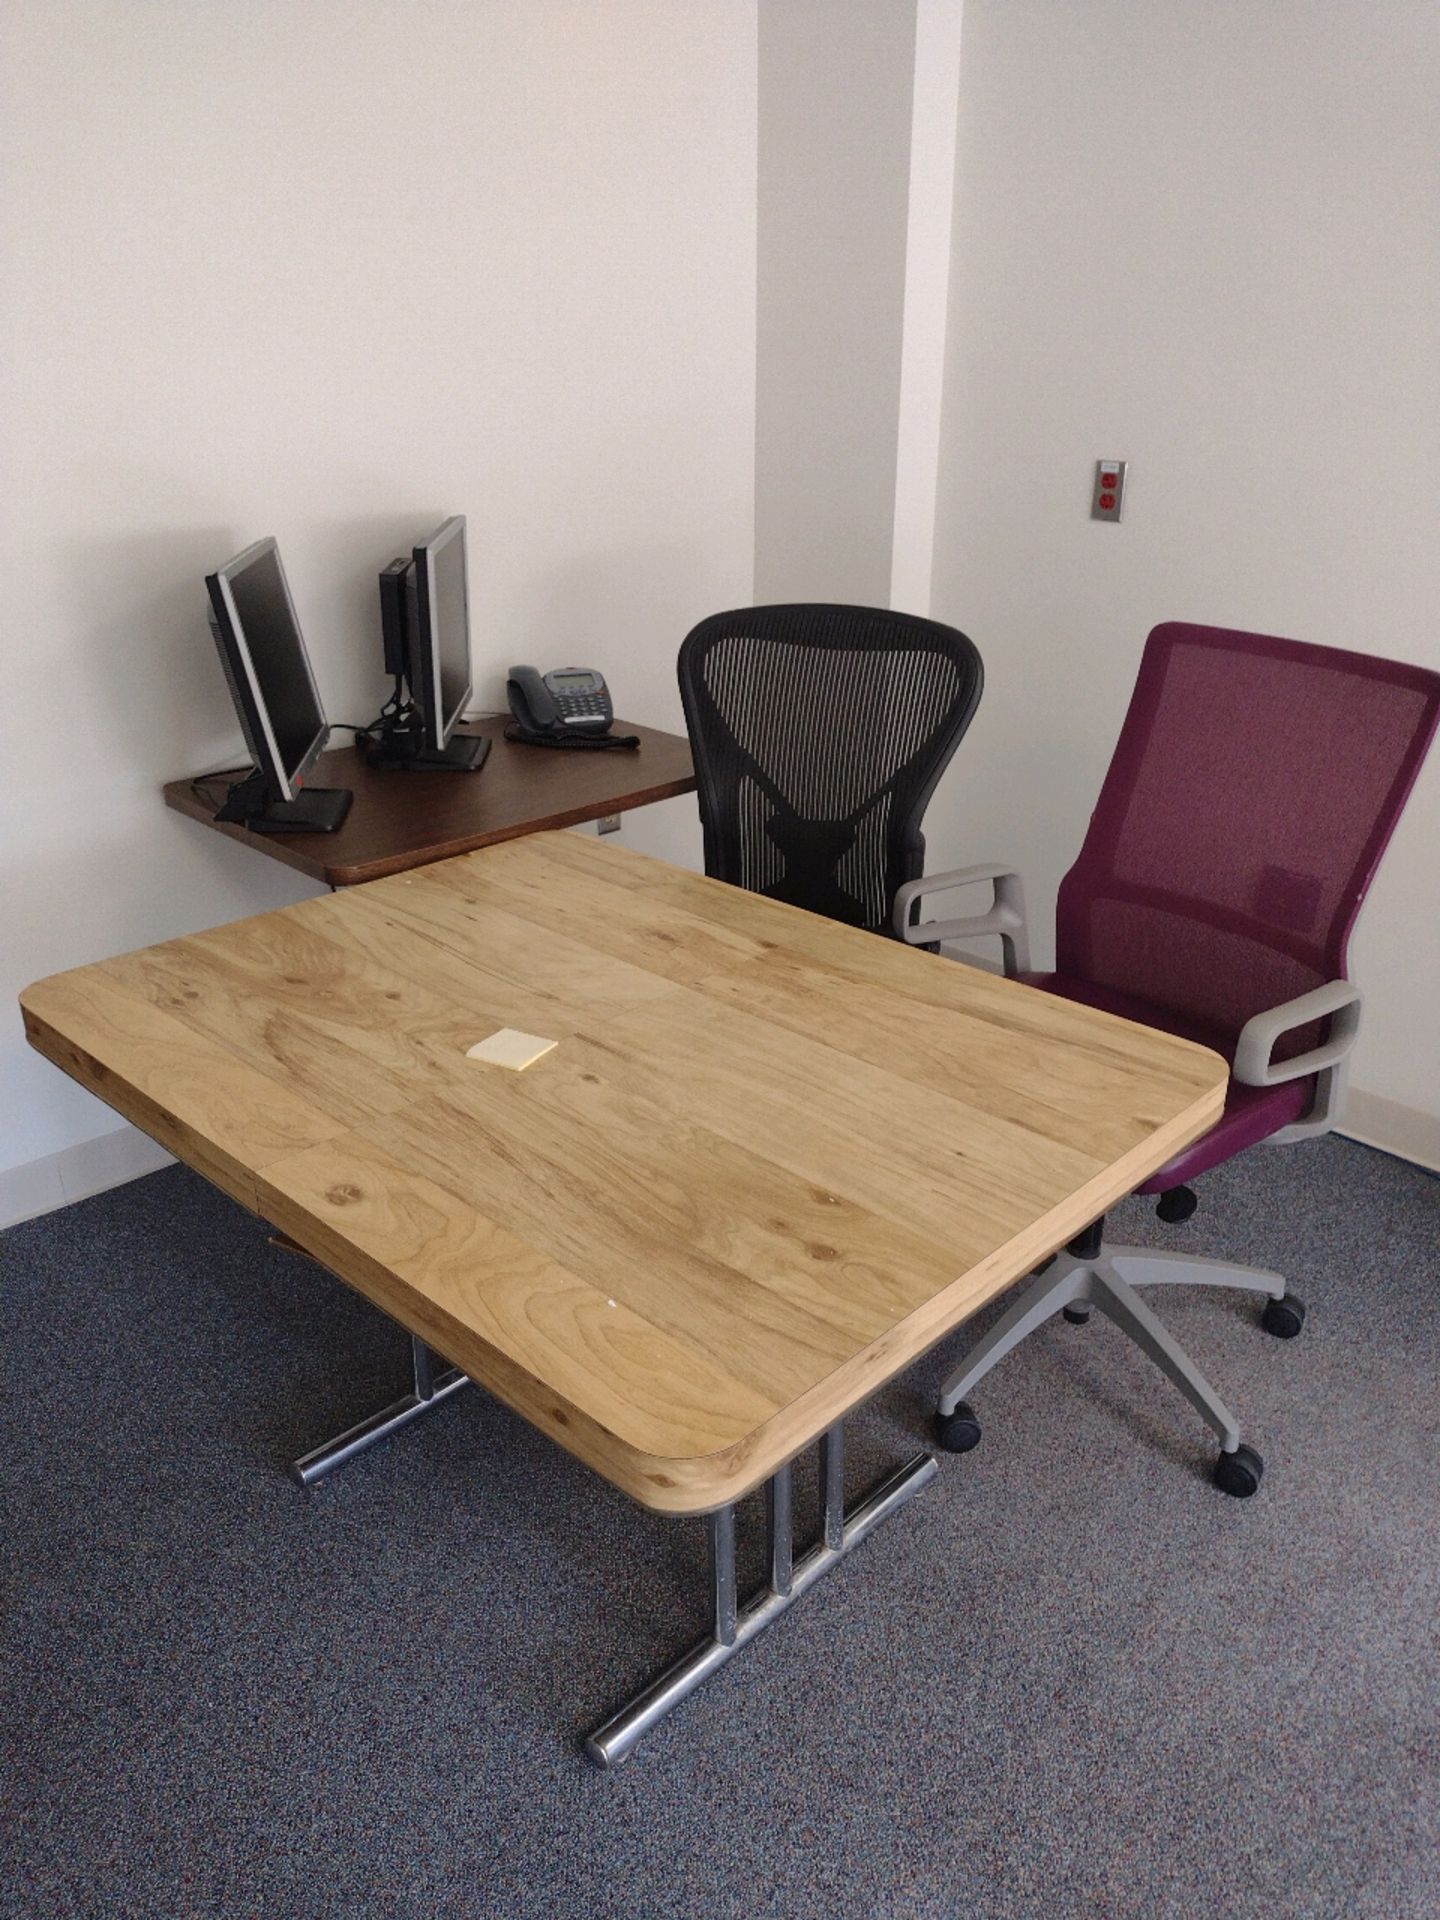 OFFICE TO INCLUDE: TABLES, CHAIRS, CABINETS, WHITE BOARD (IT EQUIPMENT NOT INCLUDED)